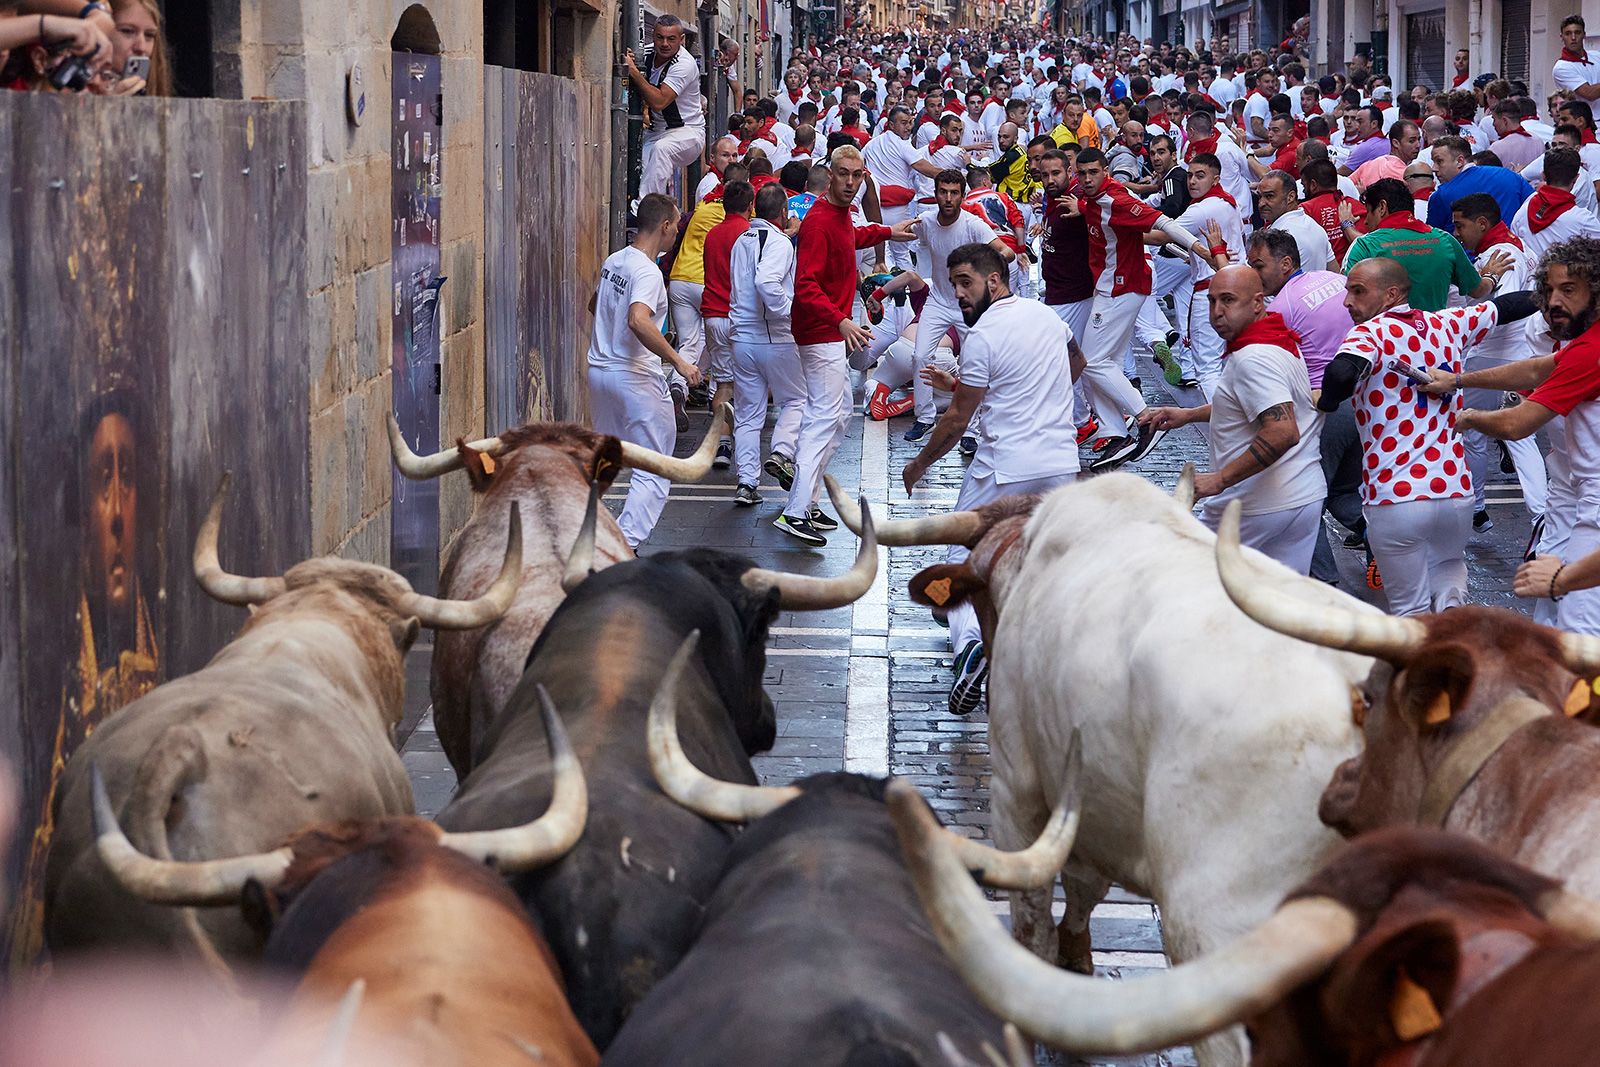 Thousands take part in first running of the bulls in Spain's San